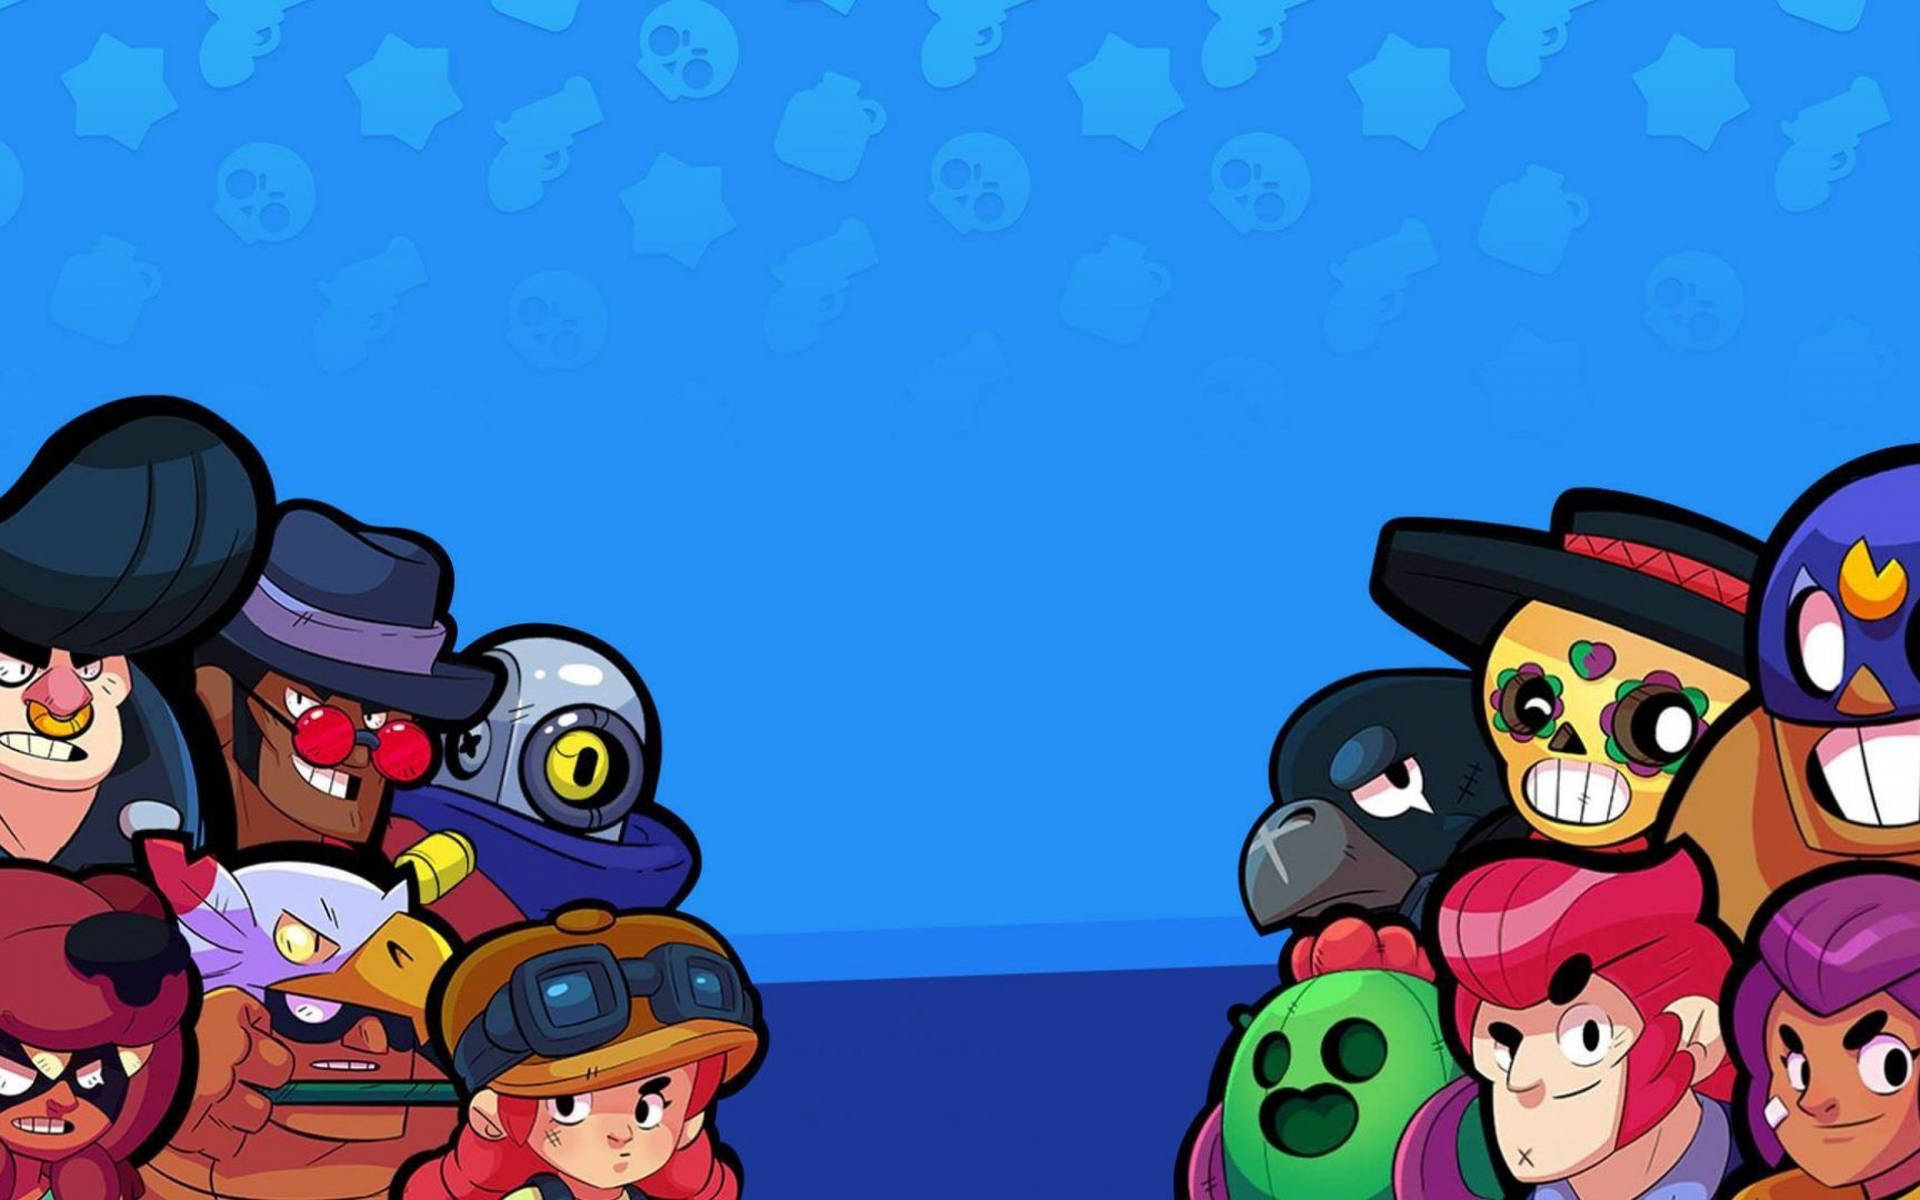 Experience The Action Of Brawl Stars! Background